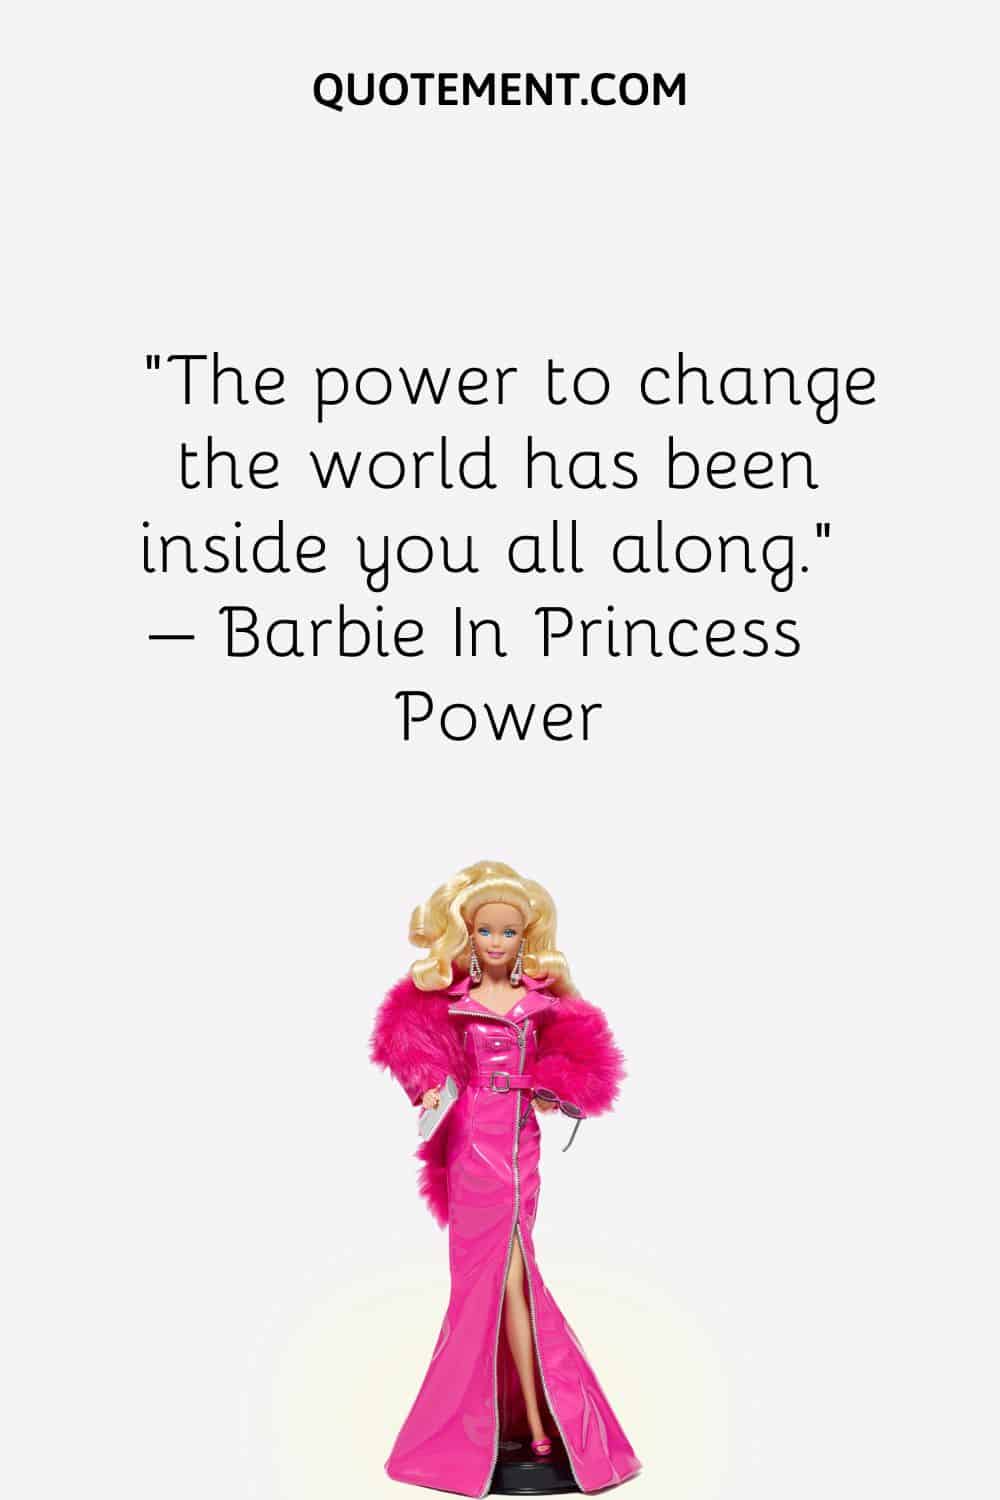 The power to change the world has been inside you all along.